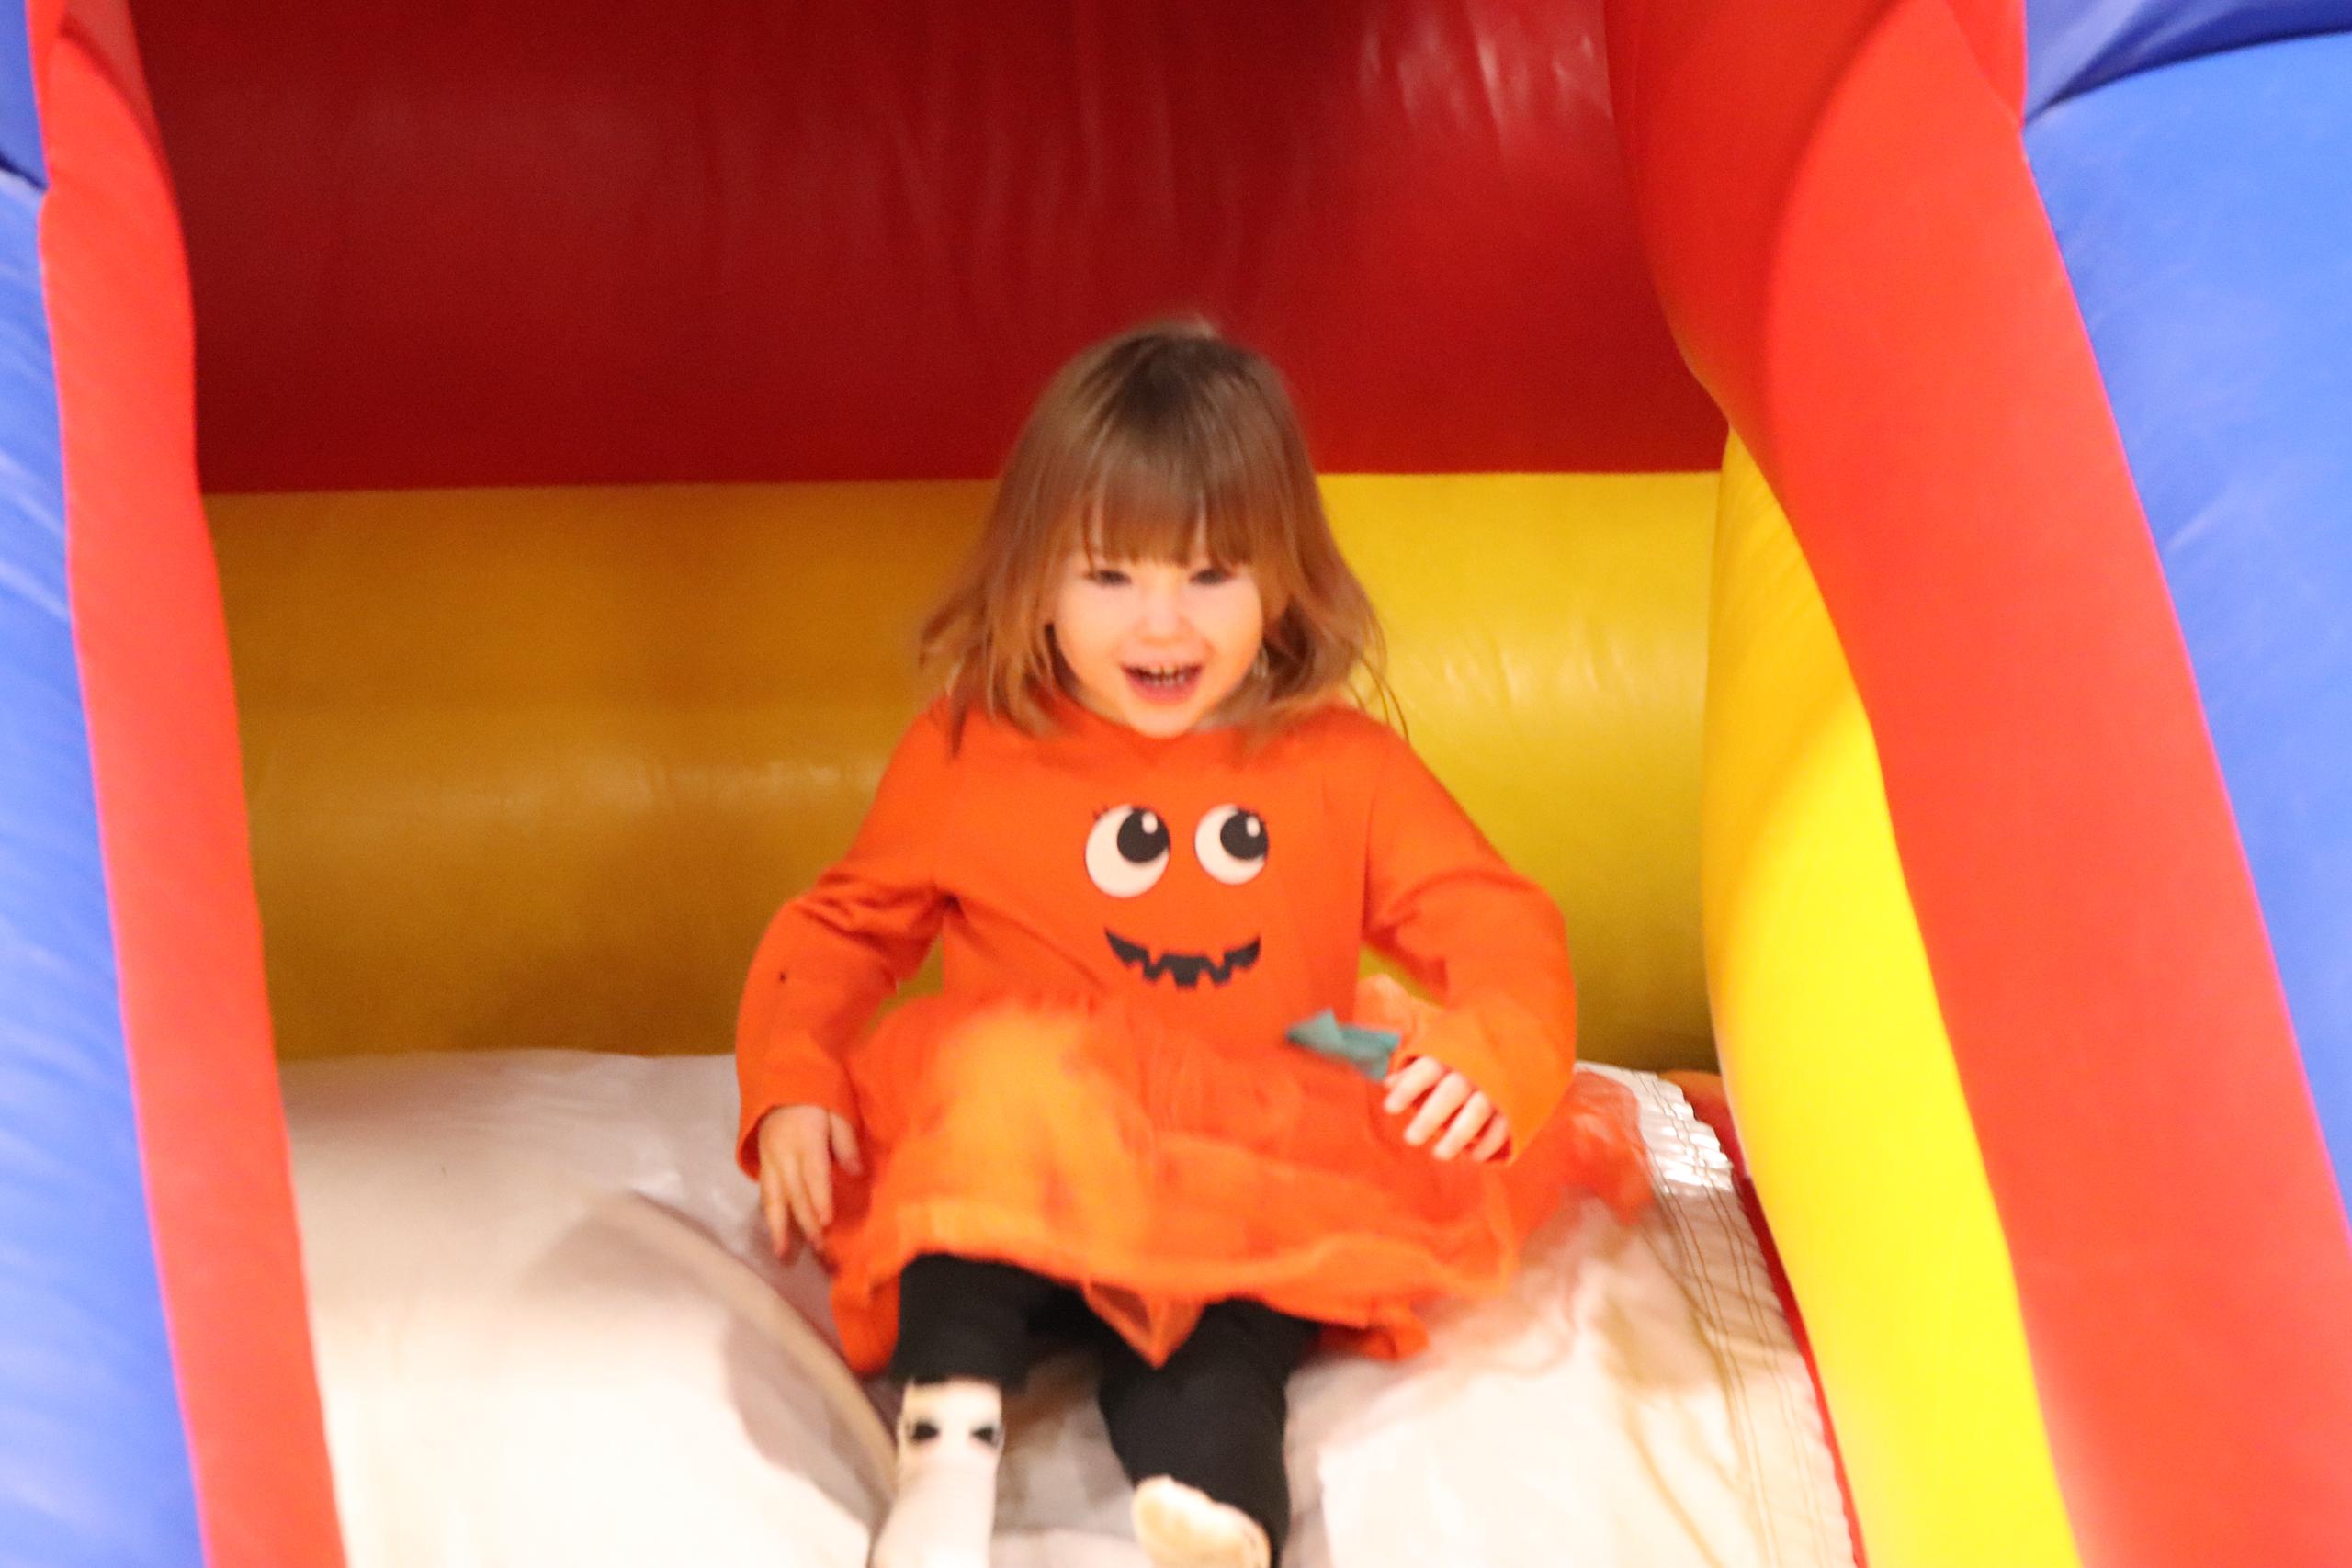 A child in a pumpkin costume goes down an inflatable slide